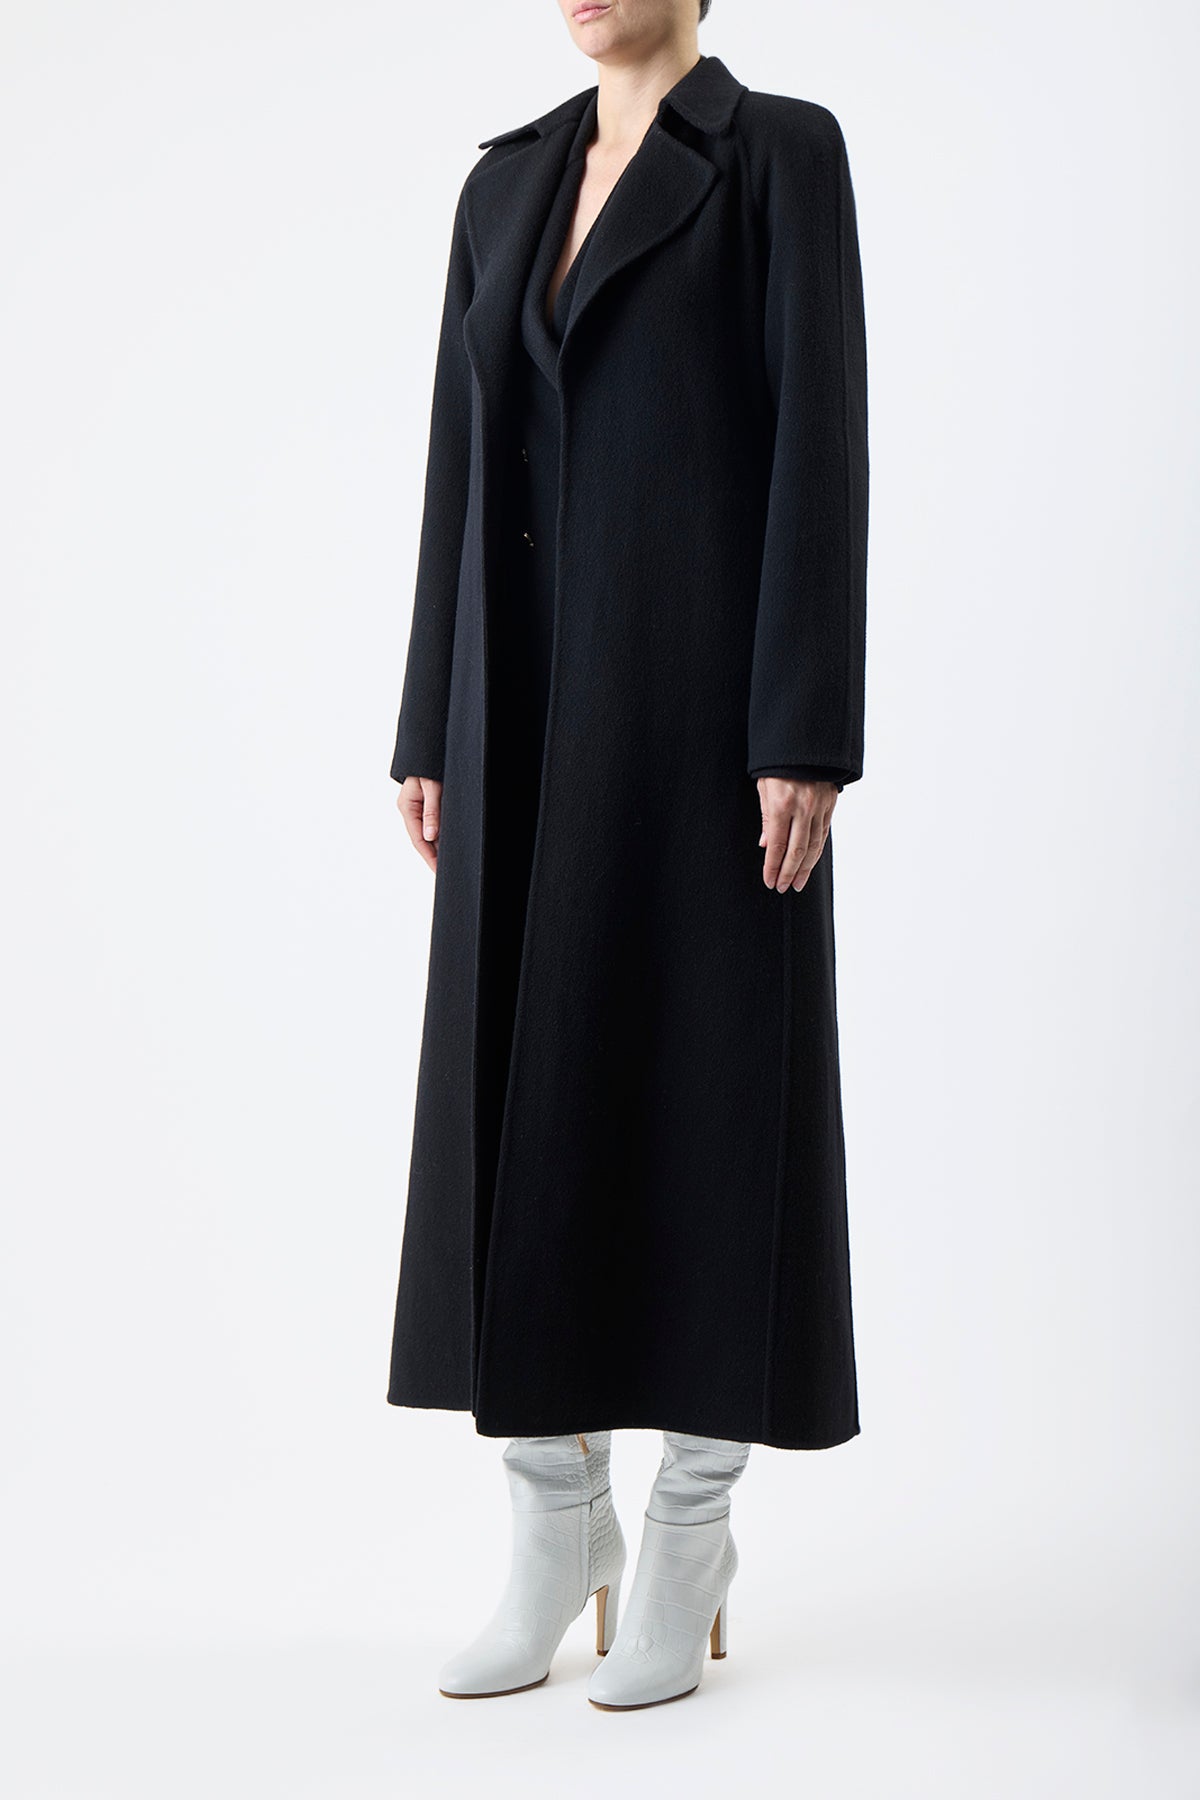 Lachlan Trench Coat in Double-Face Recycled Cashmere